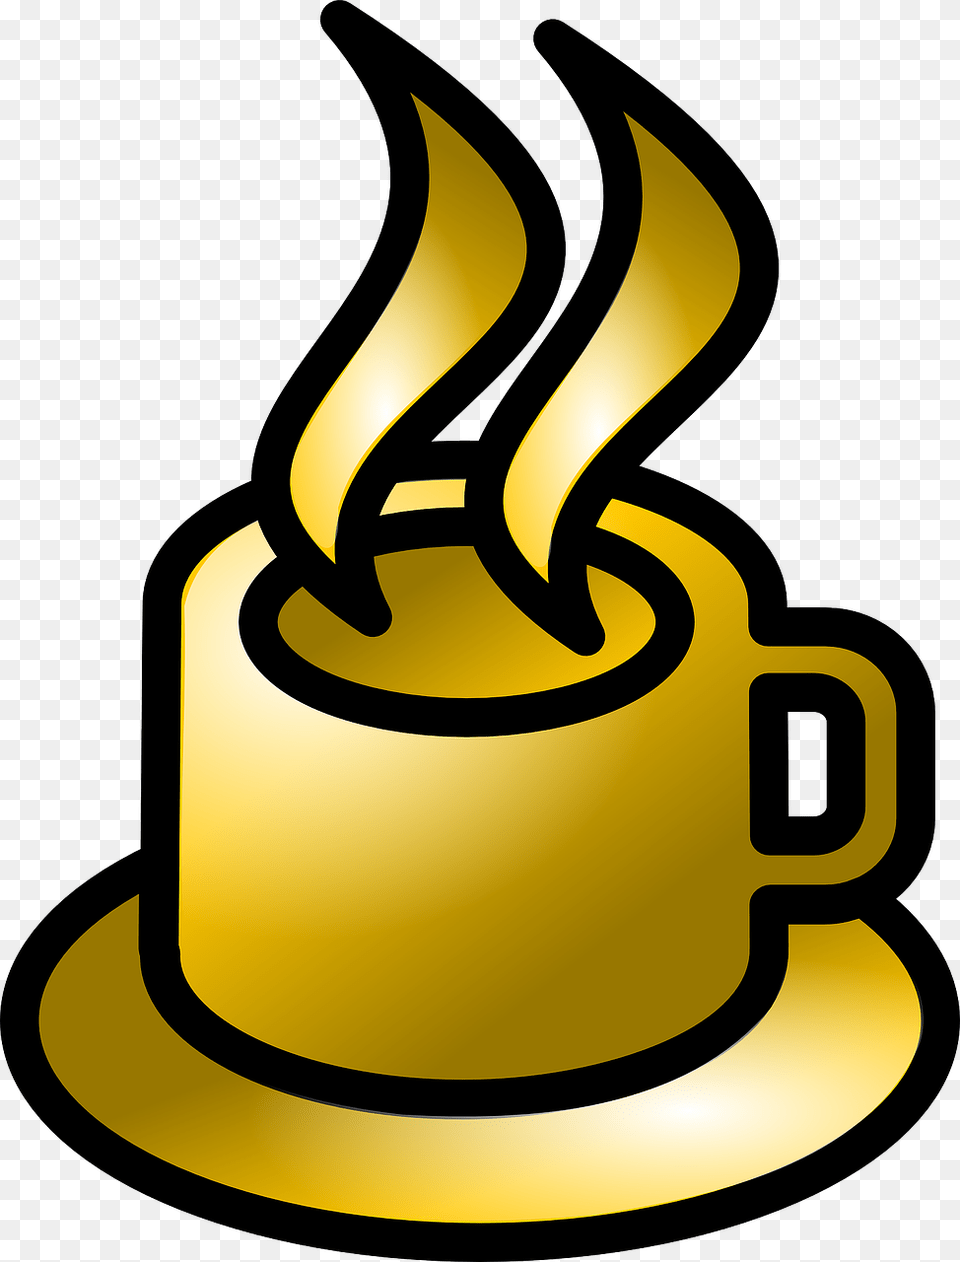 Coffee Cup Drink Picture Coffee Cup Clip Art, Fire, Flame, Lighting, Birthday Cake Png